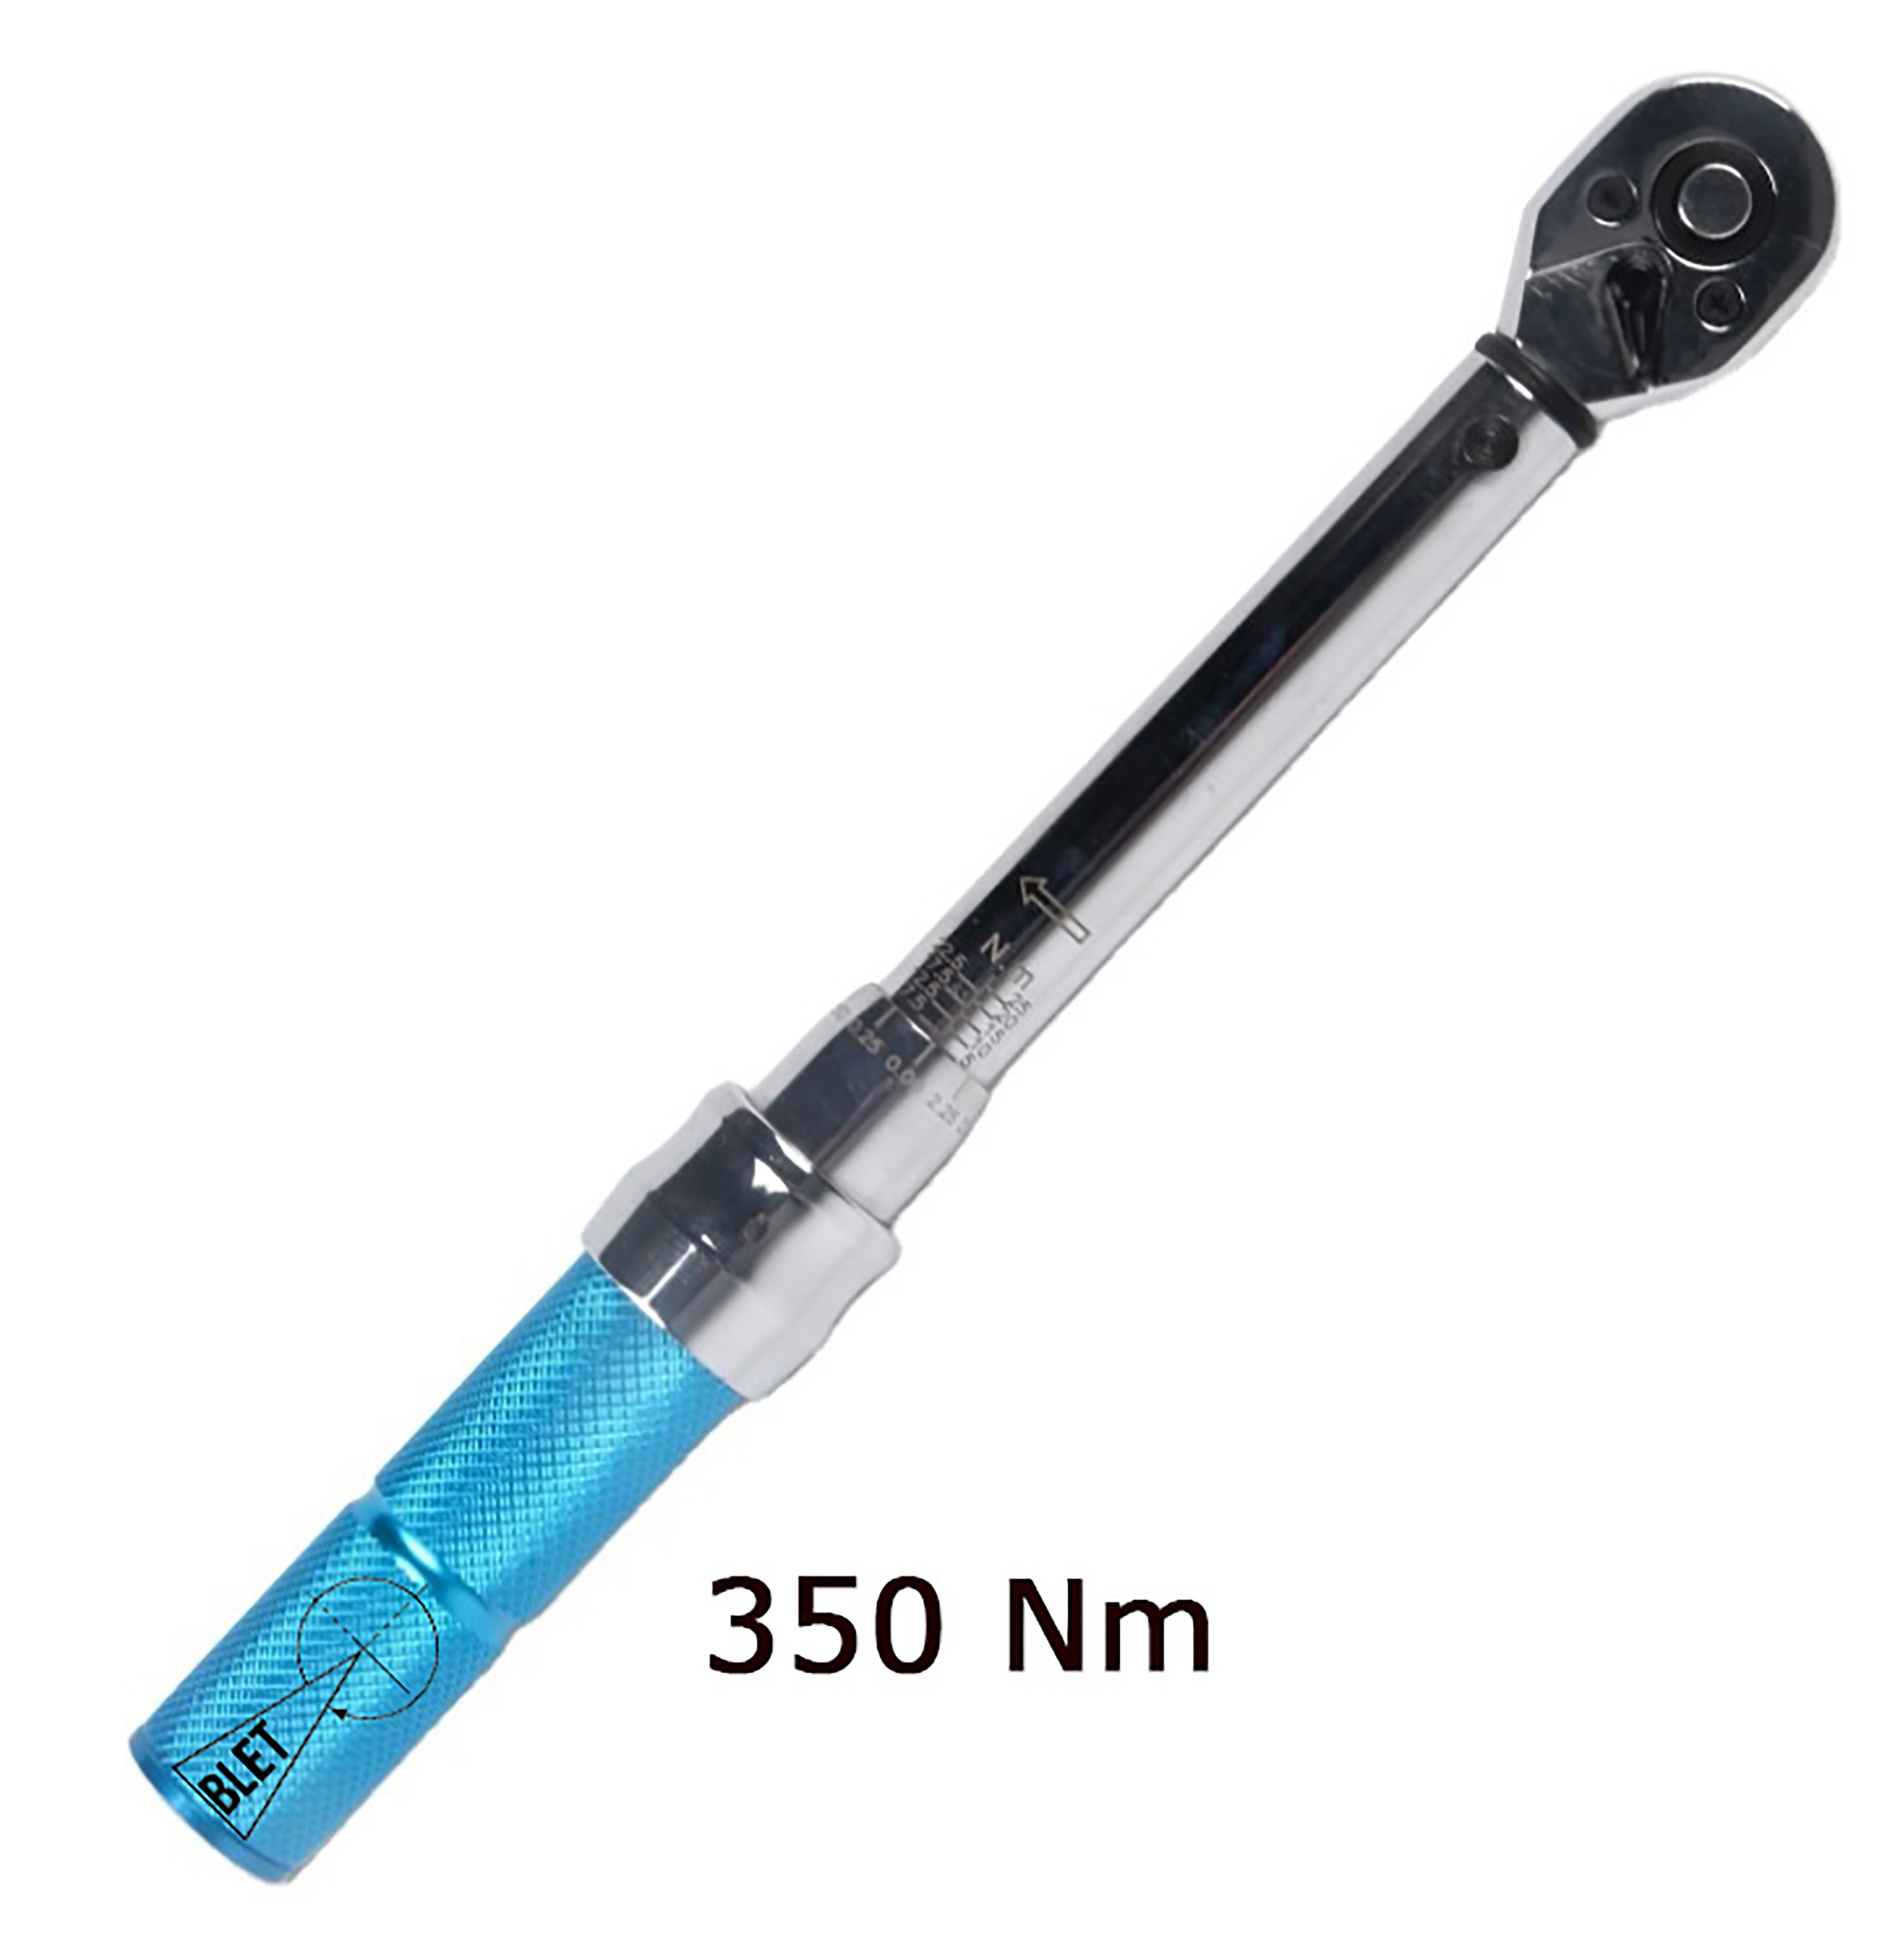 MECHANICAL TORQUE WRENCH 65-350 Nm READING 1 Nm SIZE 1/2" BLET<br>Ref : CLET5-CMC35012